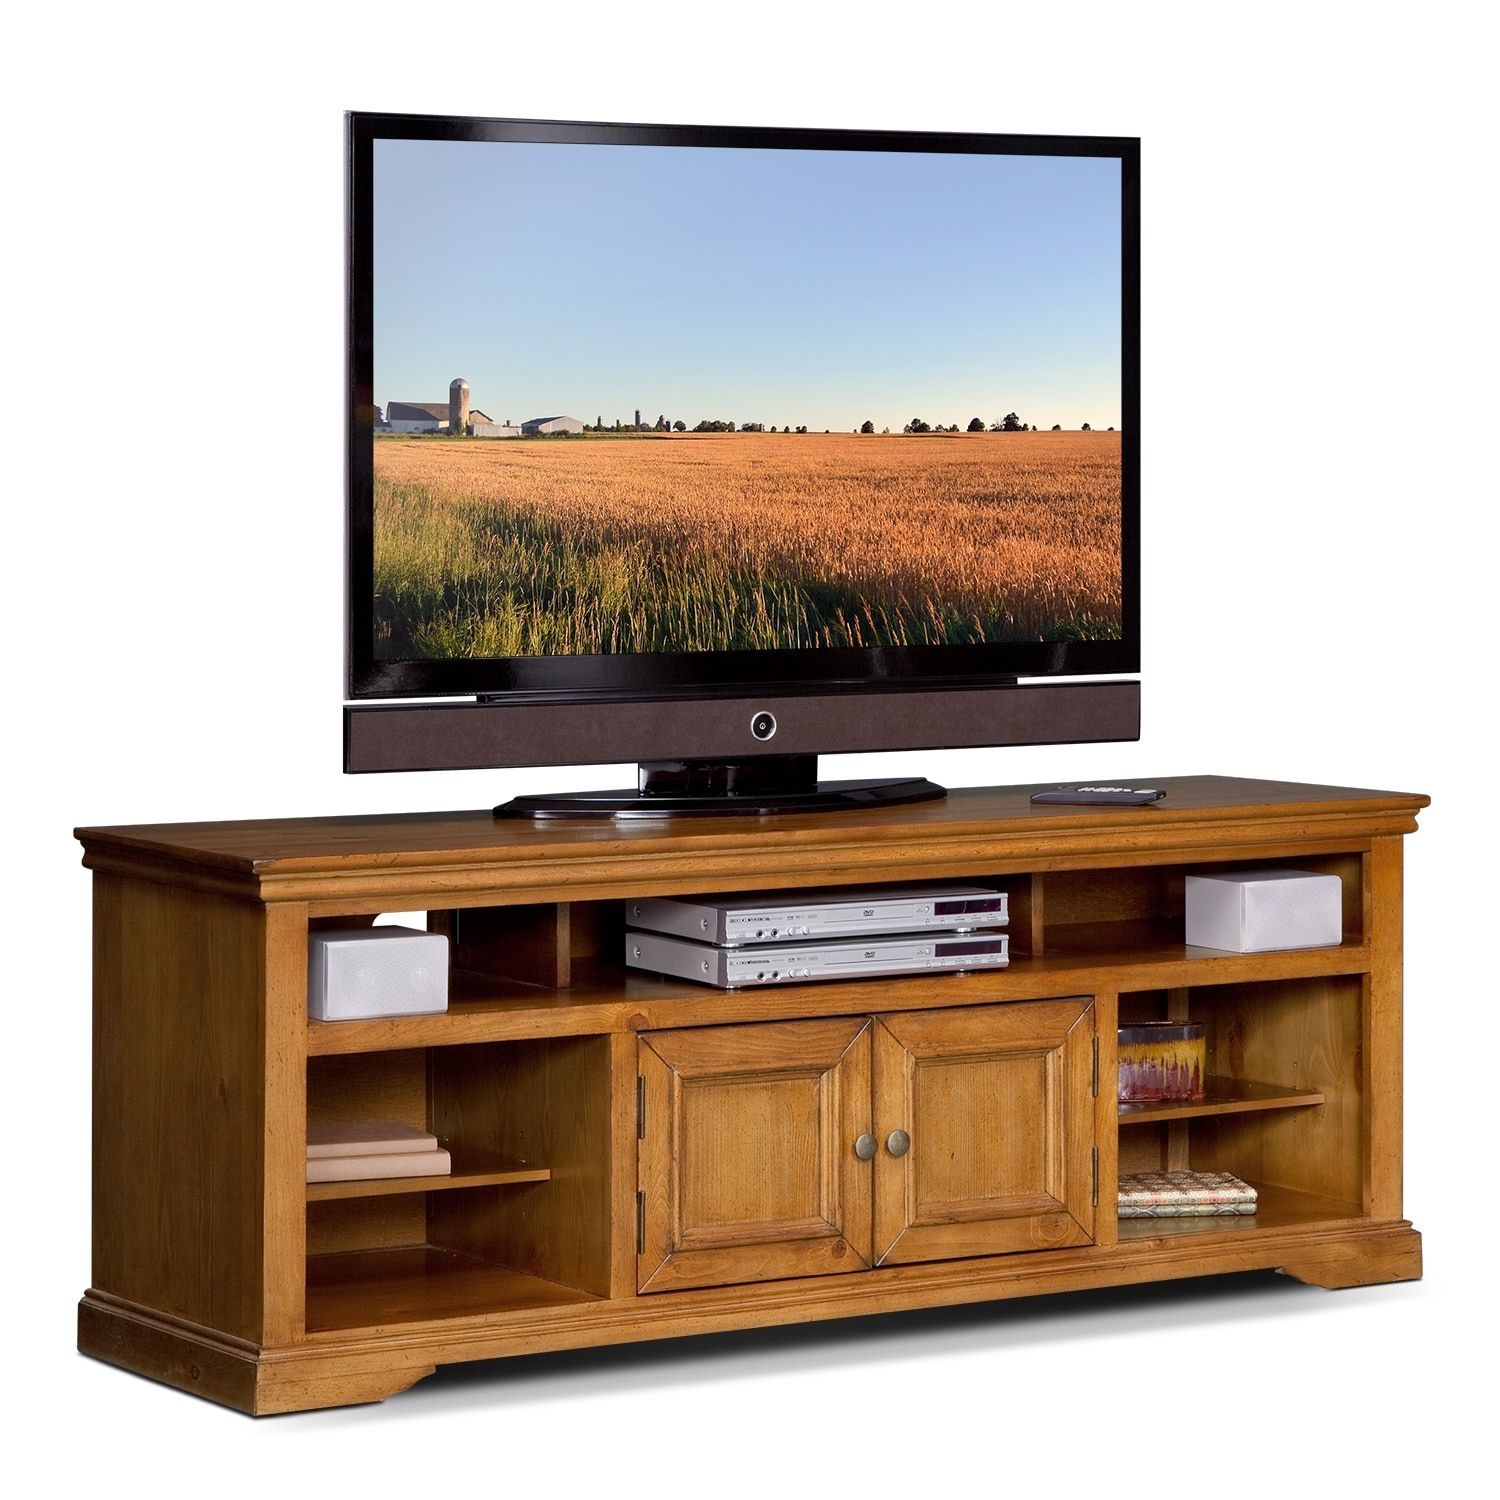 Jenson 70" Tv Stand – Pine | Value City Furniture Pertaining To Green Tv Stands (View 3 of 15)